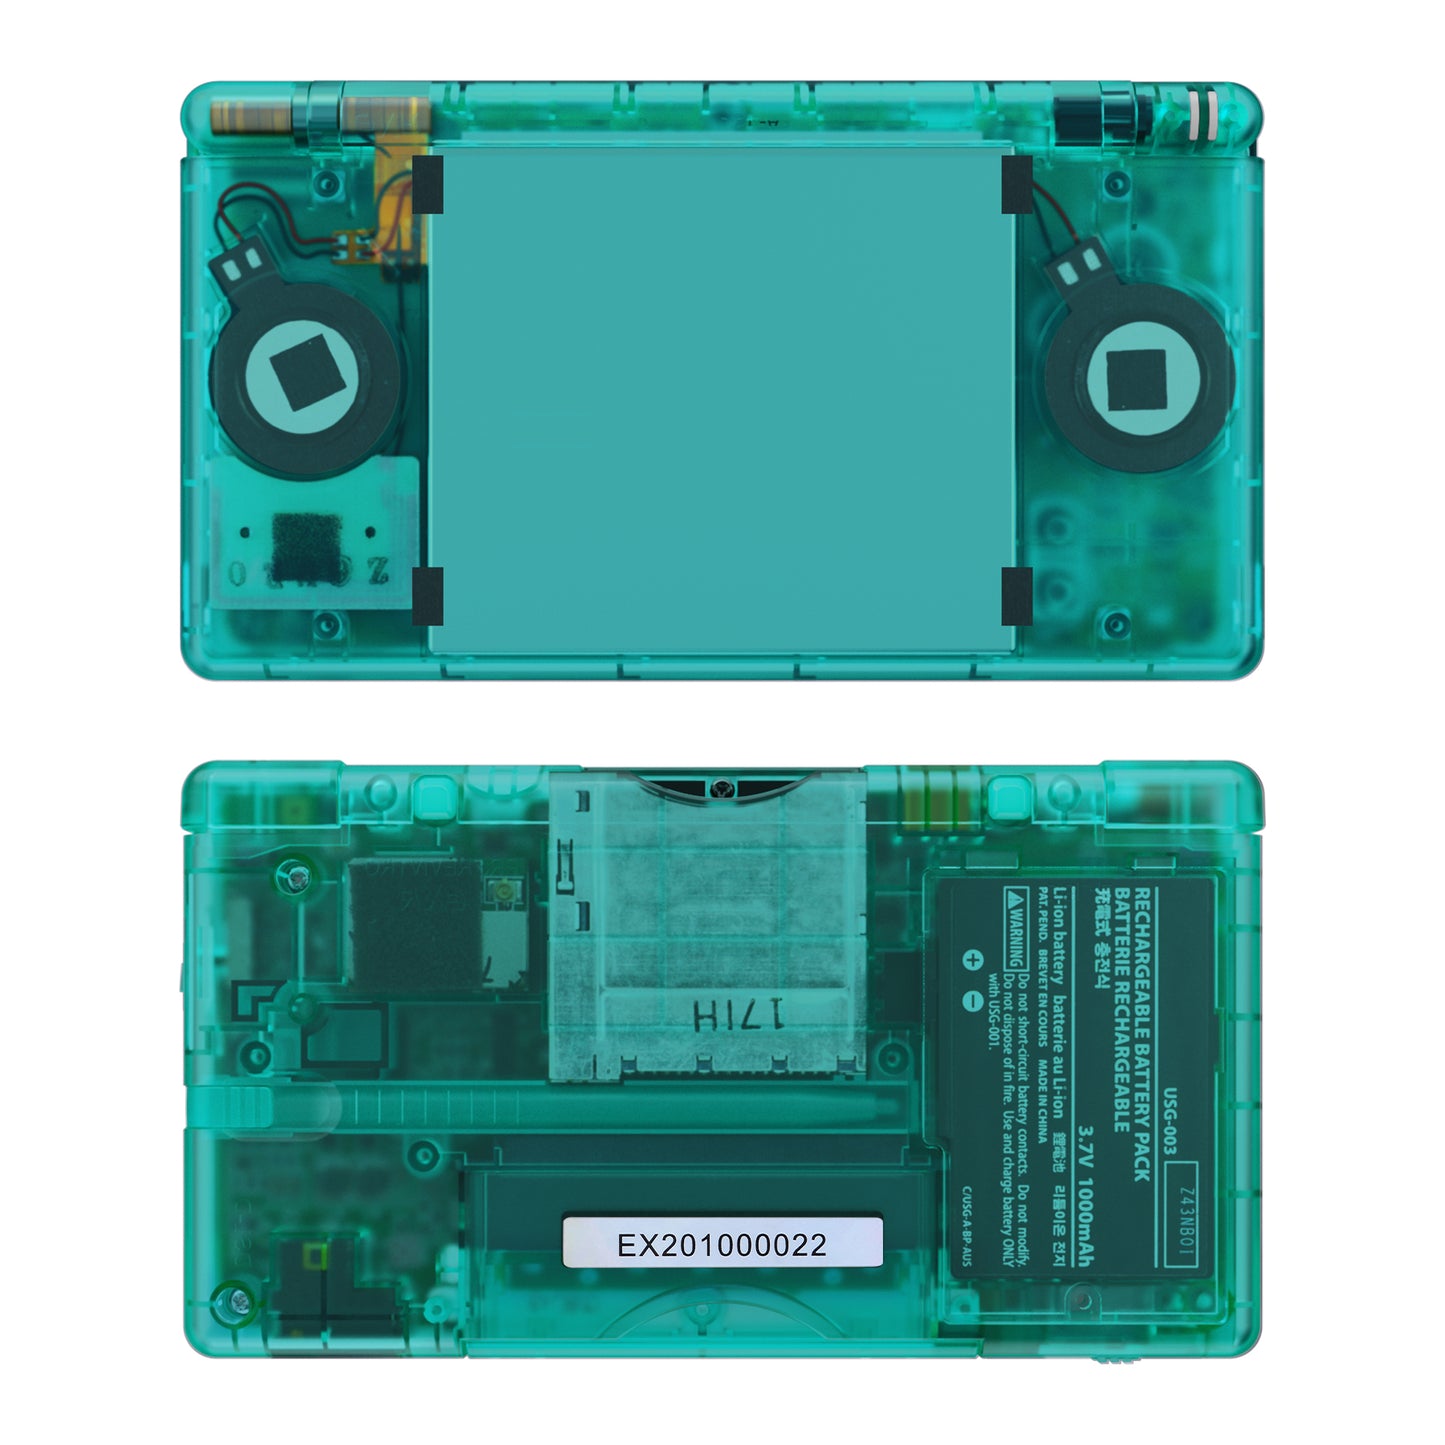 eXtremeRate Retail Emerald Green Replacement Full Housing Shell for Nintendo DS Lite, Custom Handheld Console Case Cover with Buttons, Screen Lens for Nintendo DS Lite NDSL - Console NOT Included - DSLM5003